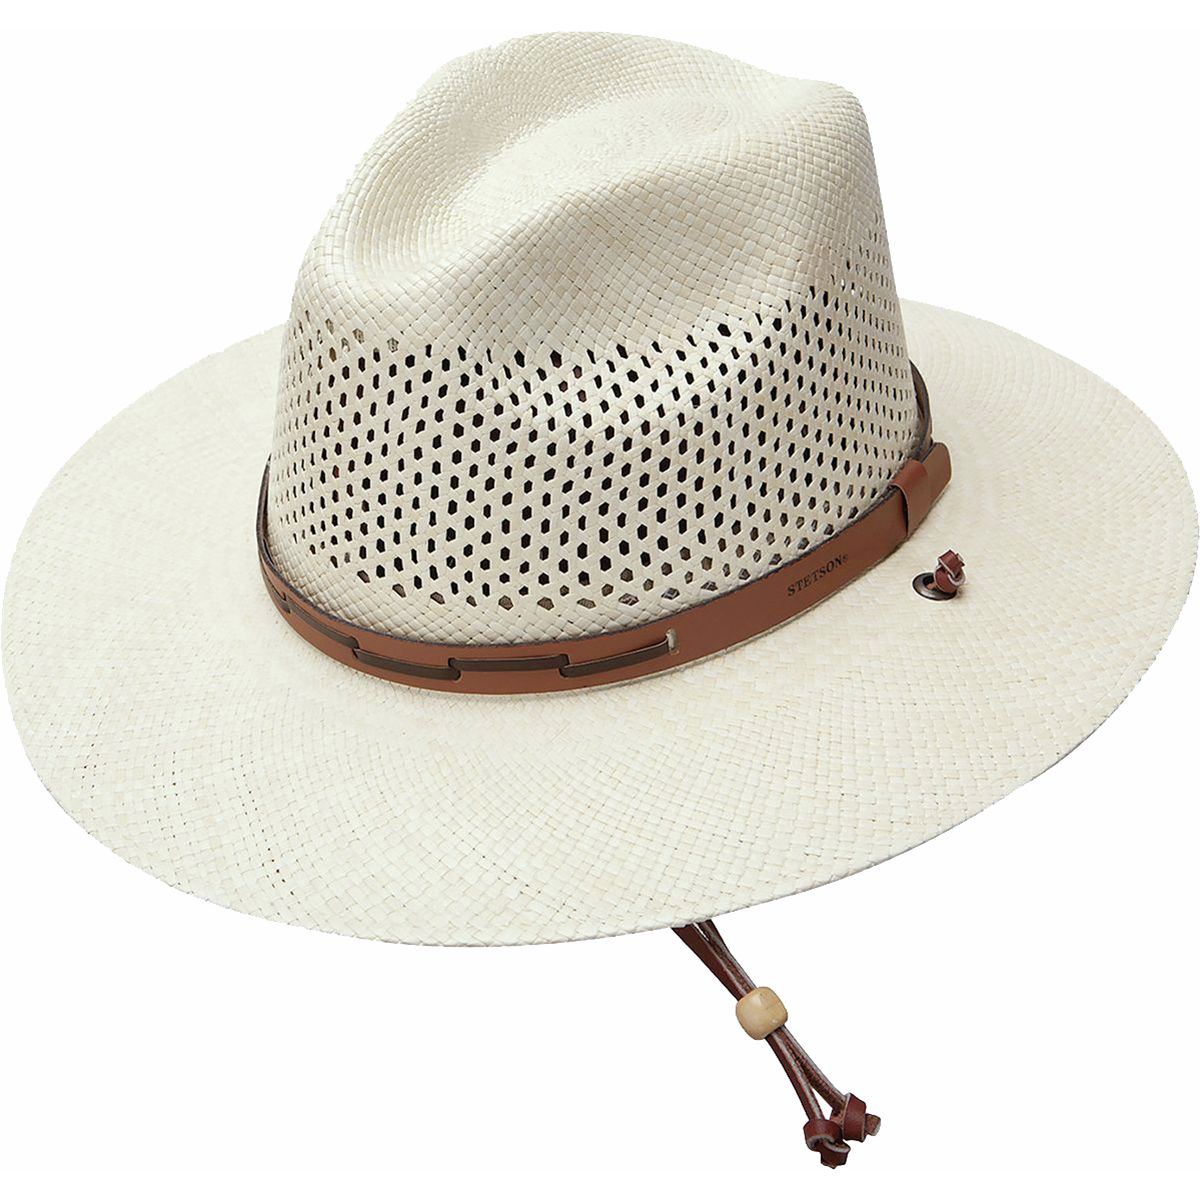 Панама-сафари airway Stetson, цвет natural printio панама сафари